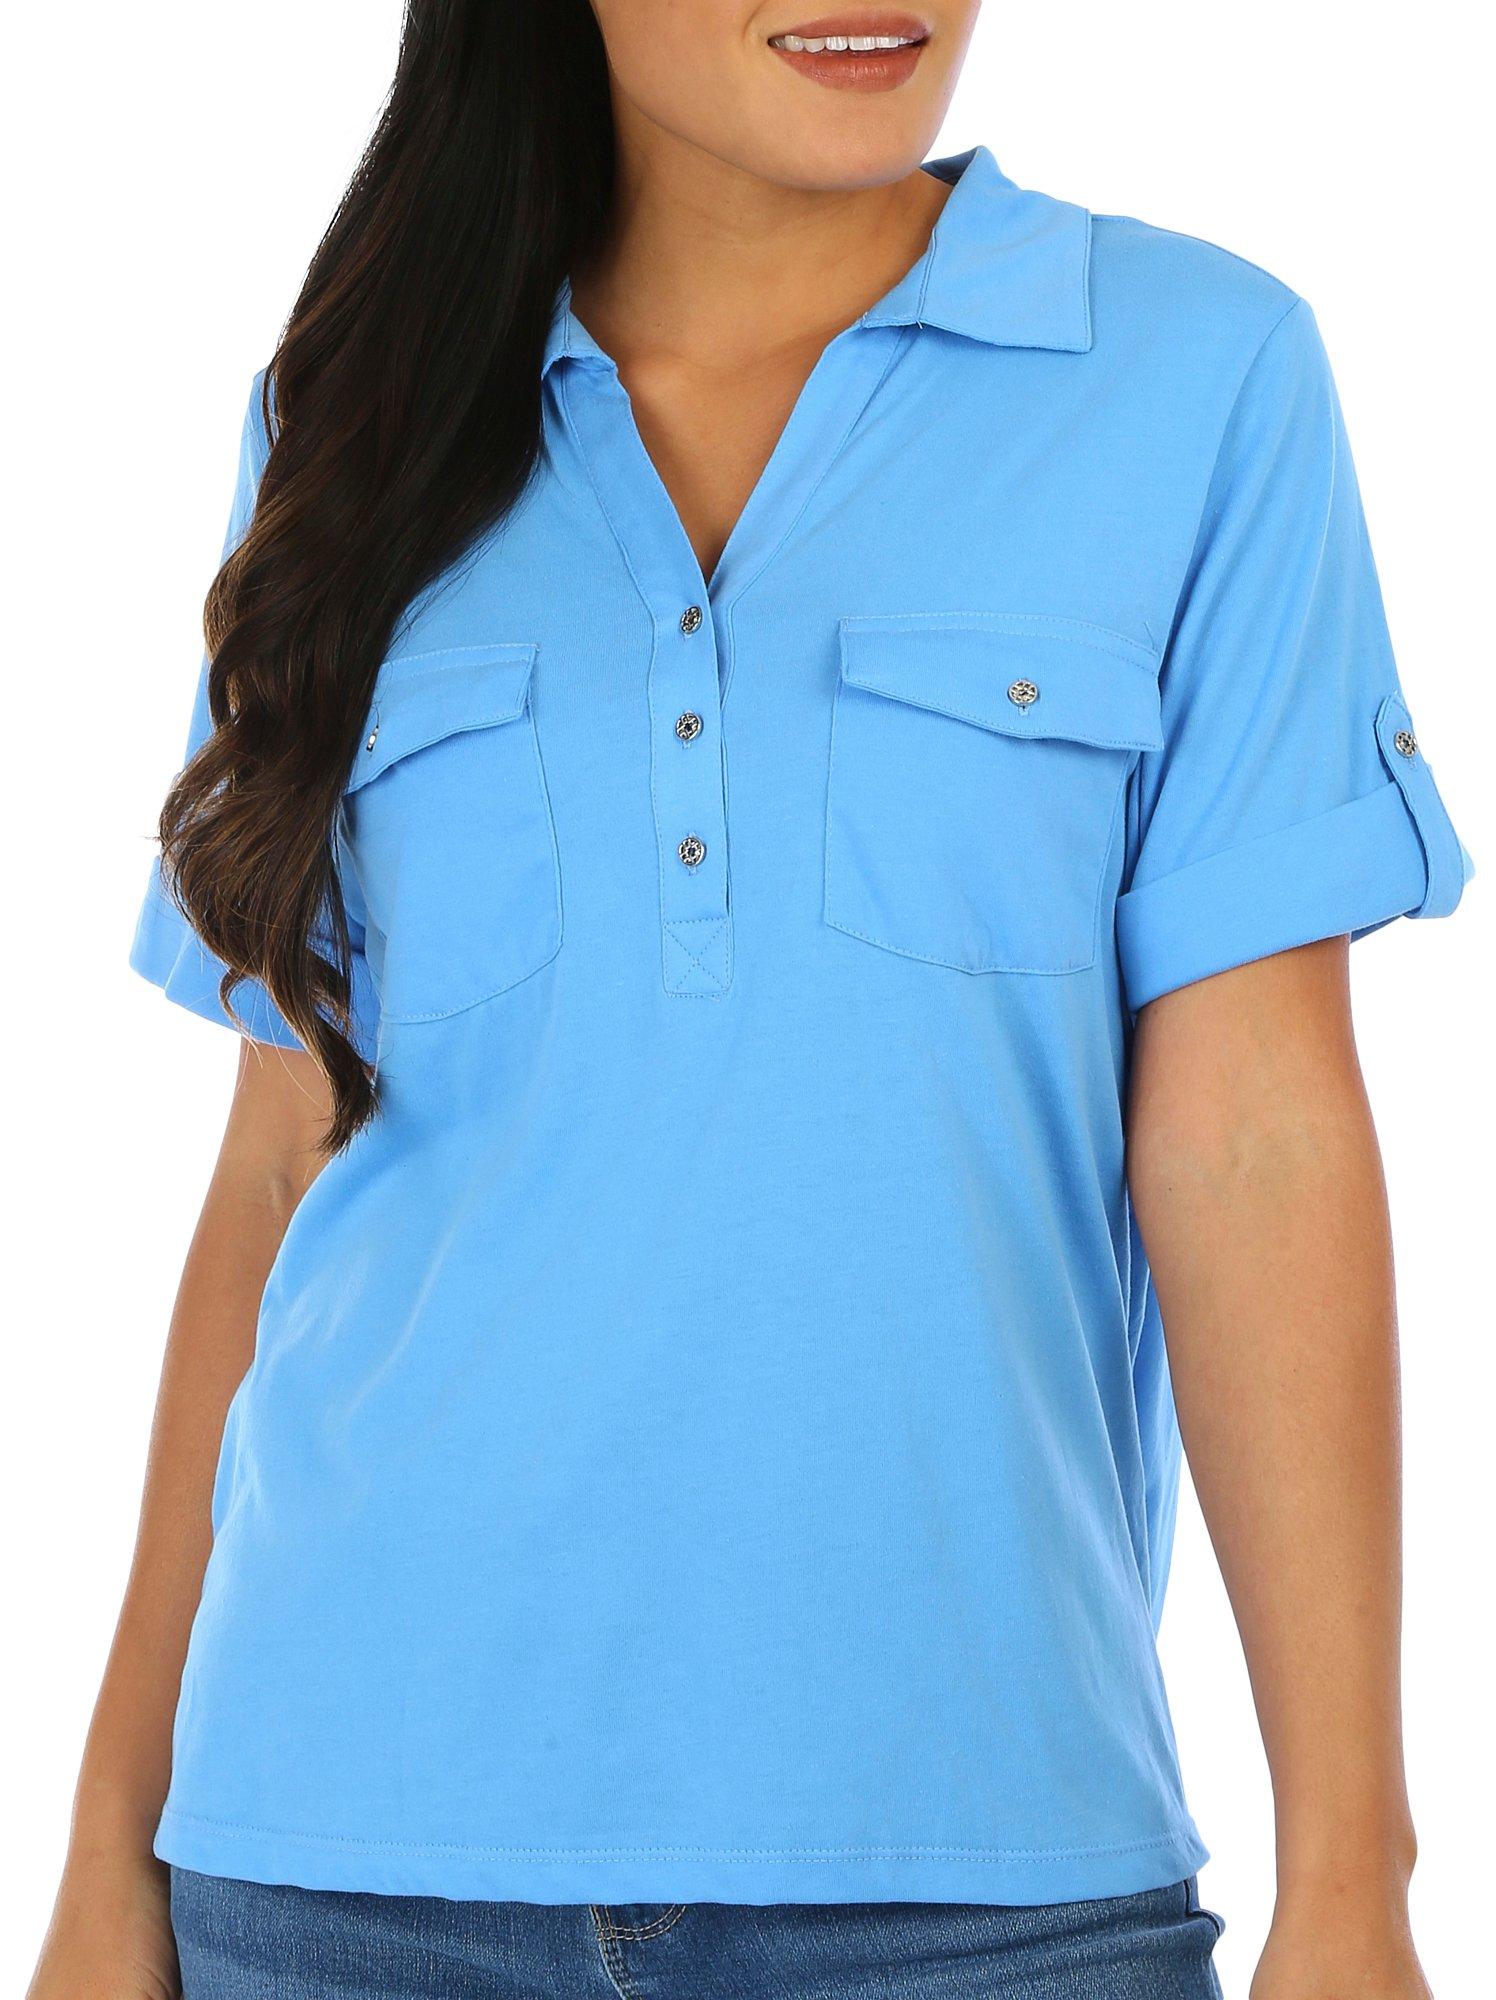 Coral Bay Petite Solid Two-Pocket Short Sleeve Polo